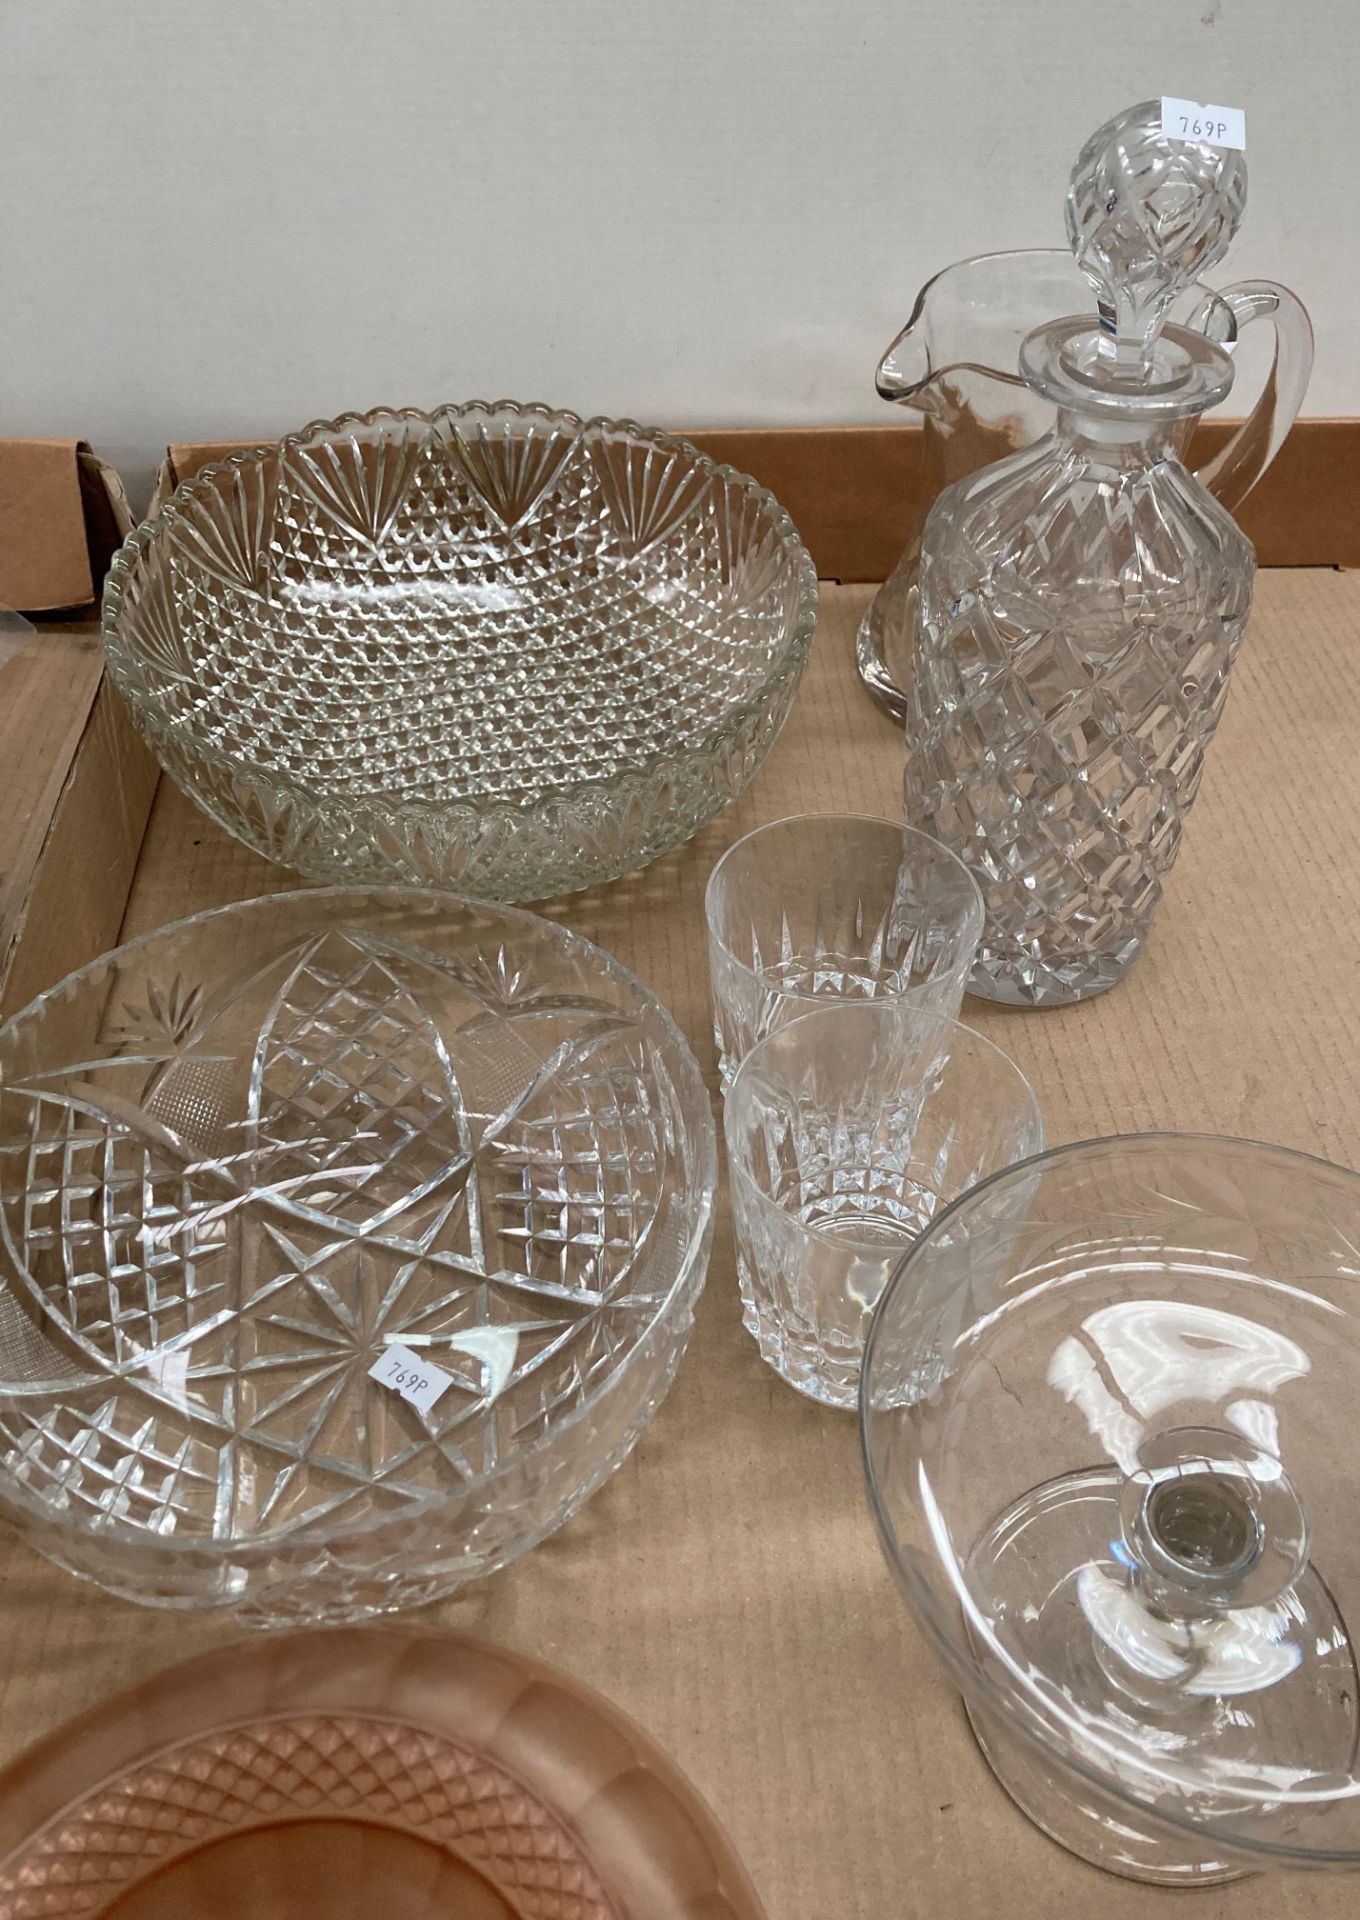 Contents to tray - assorted glassware (22 pieces) including decanter, bowls, jug, - Image 2 of 3